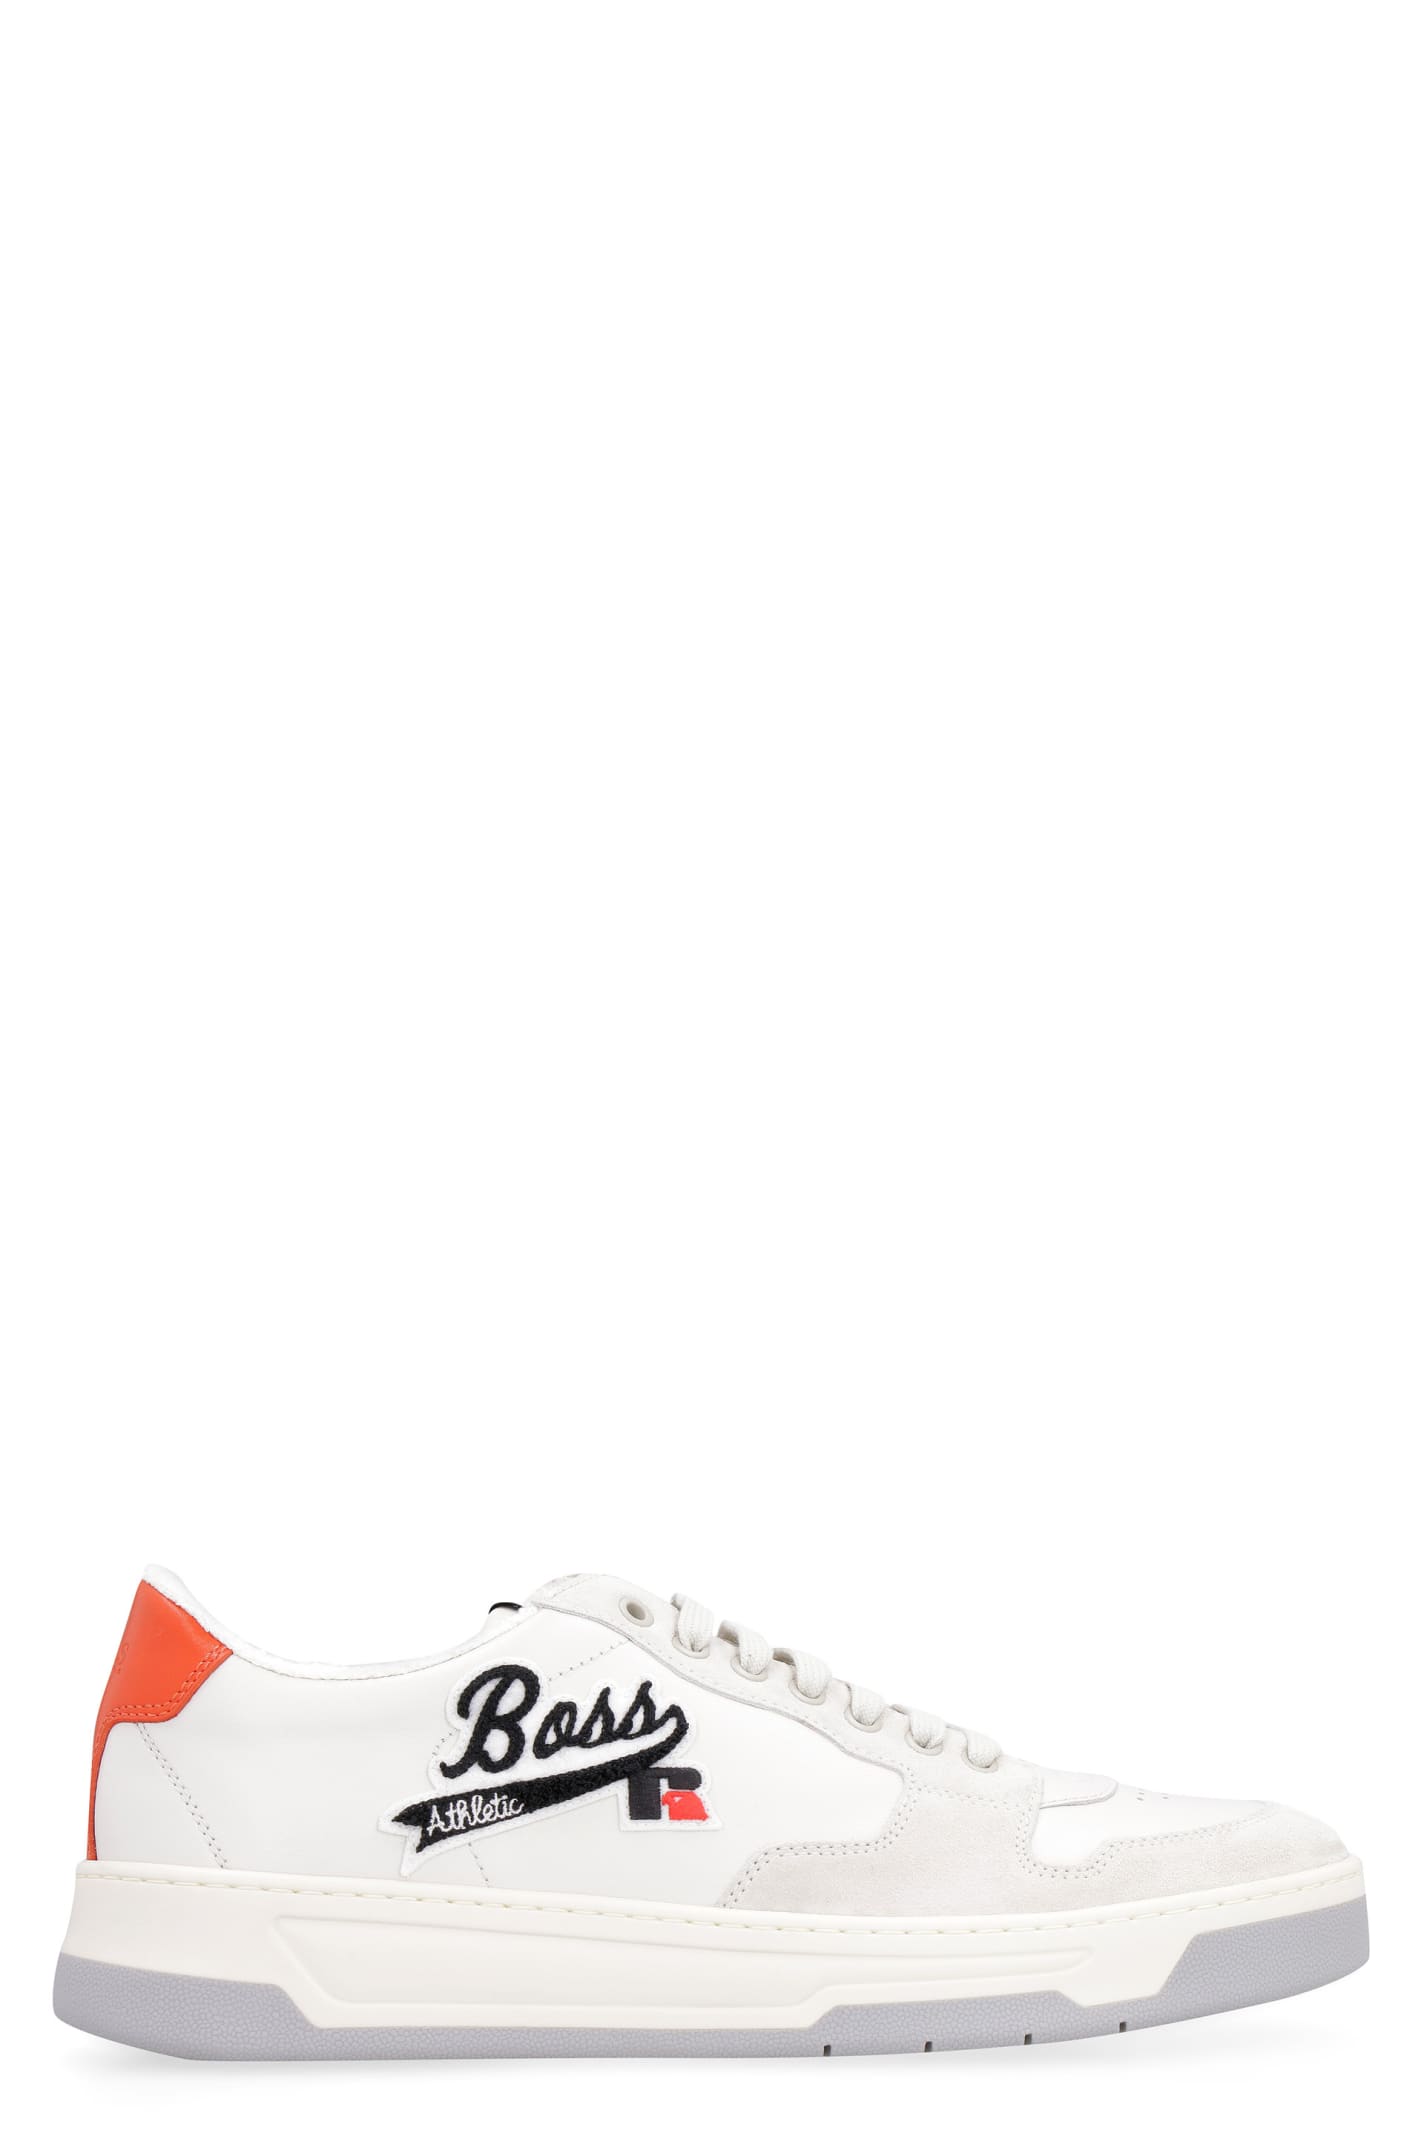 Hugo Boss Boss X Russell Athletic - Baltimore Leather Low-top